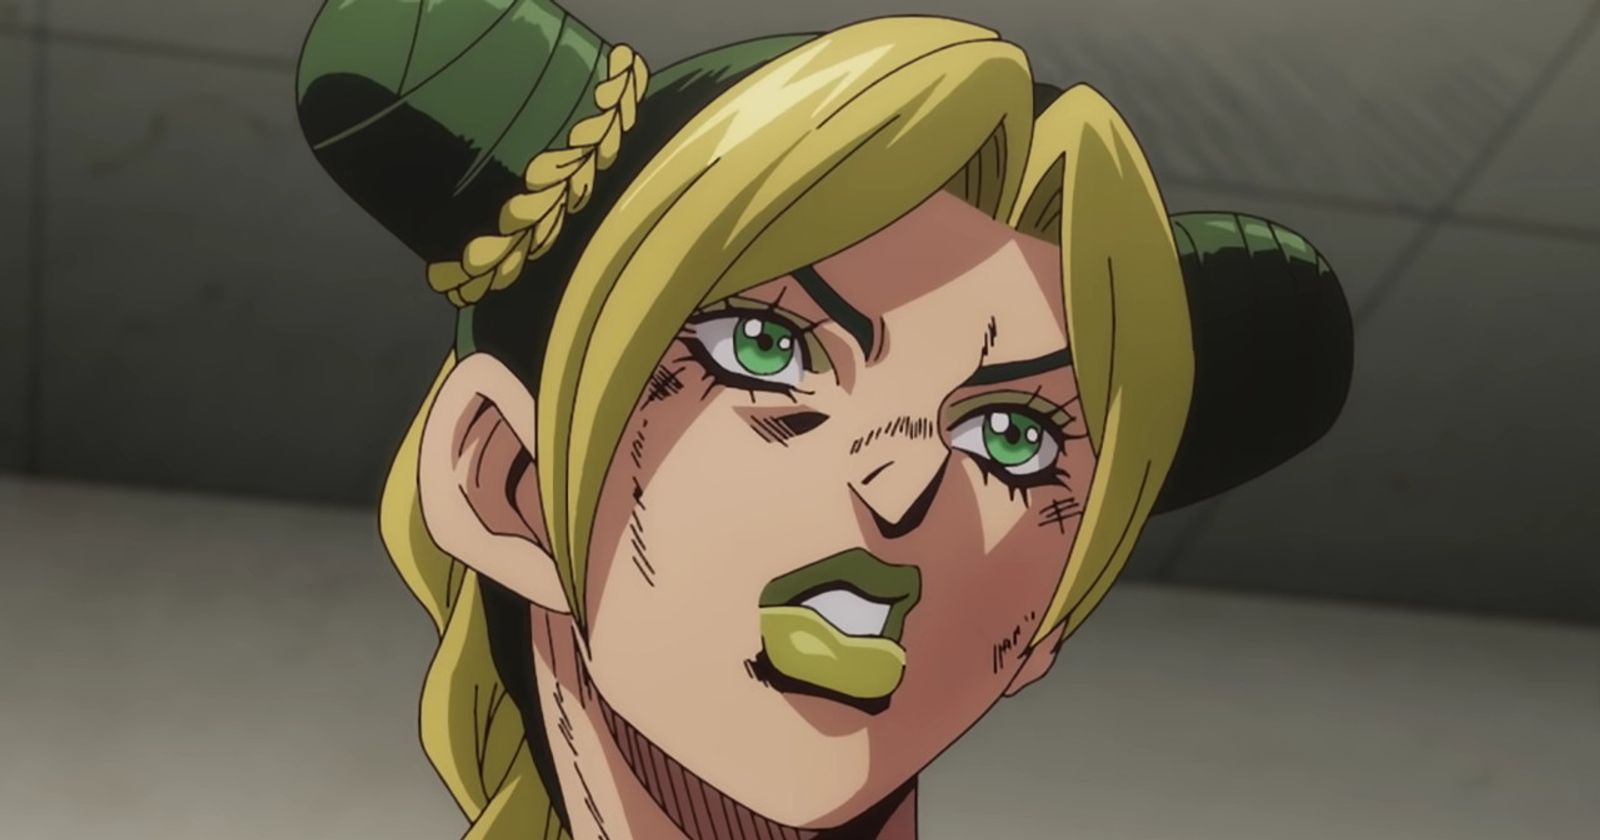 JoJo' Bizarre Adventures : Stone ocean part 2 leaves fans disappointed  about some creative changes